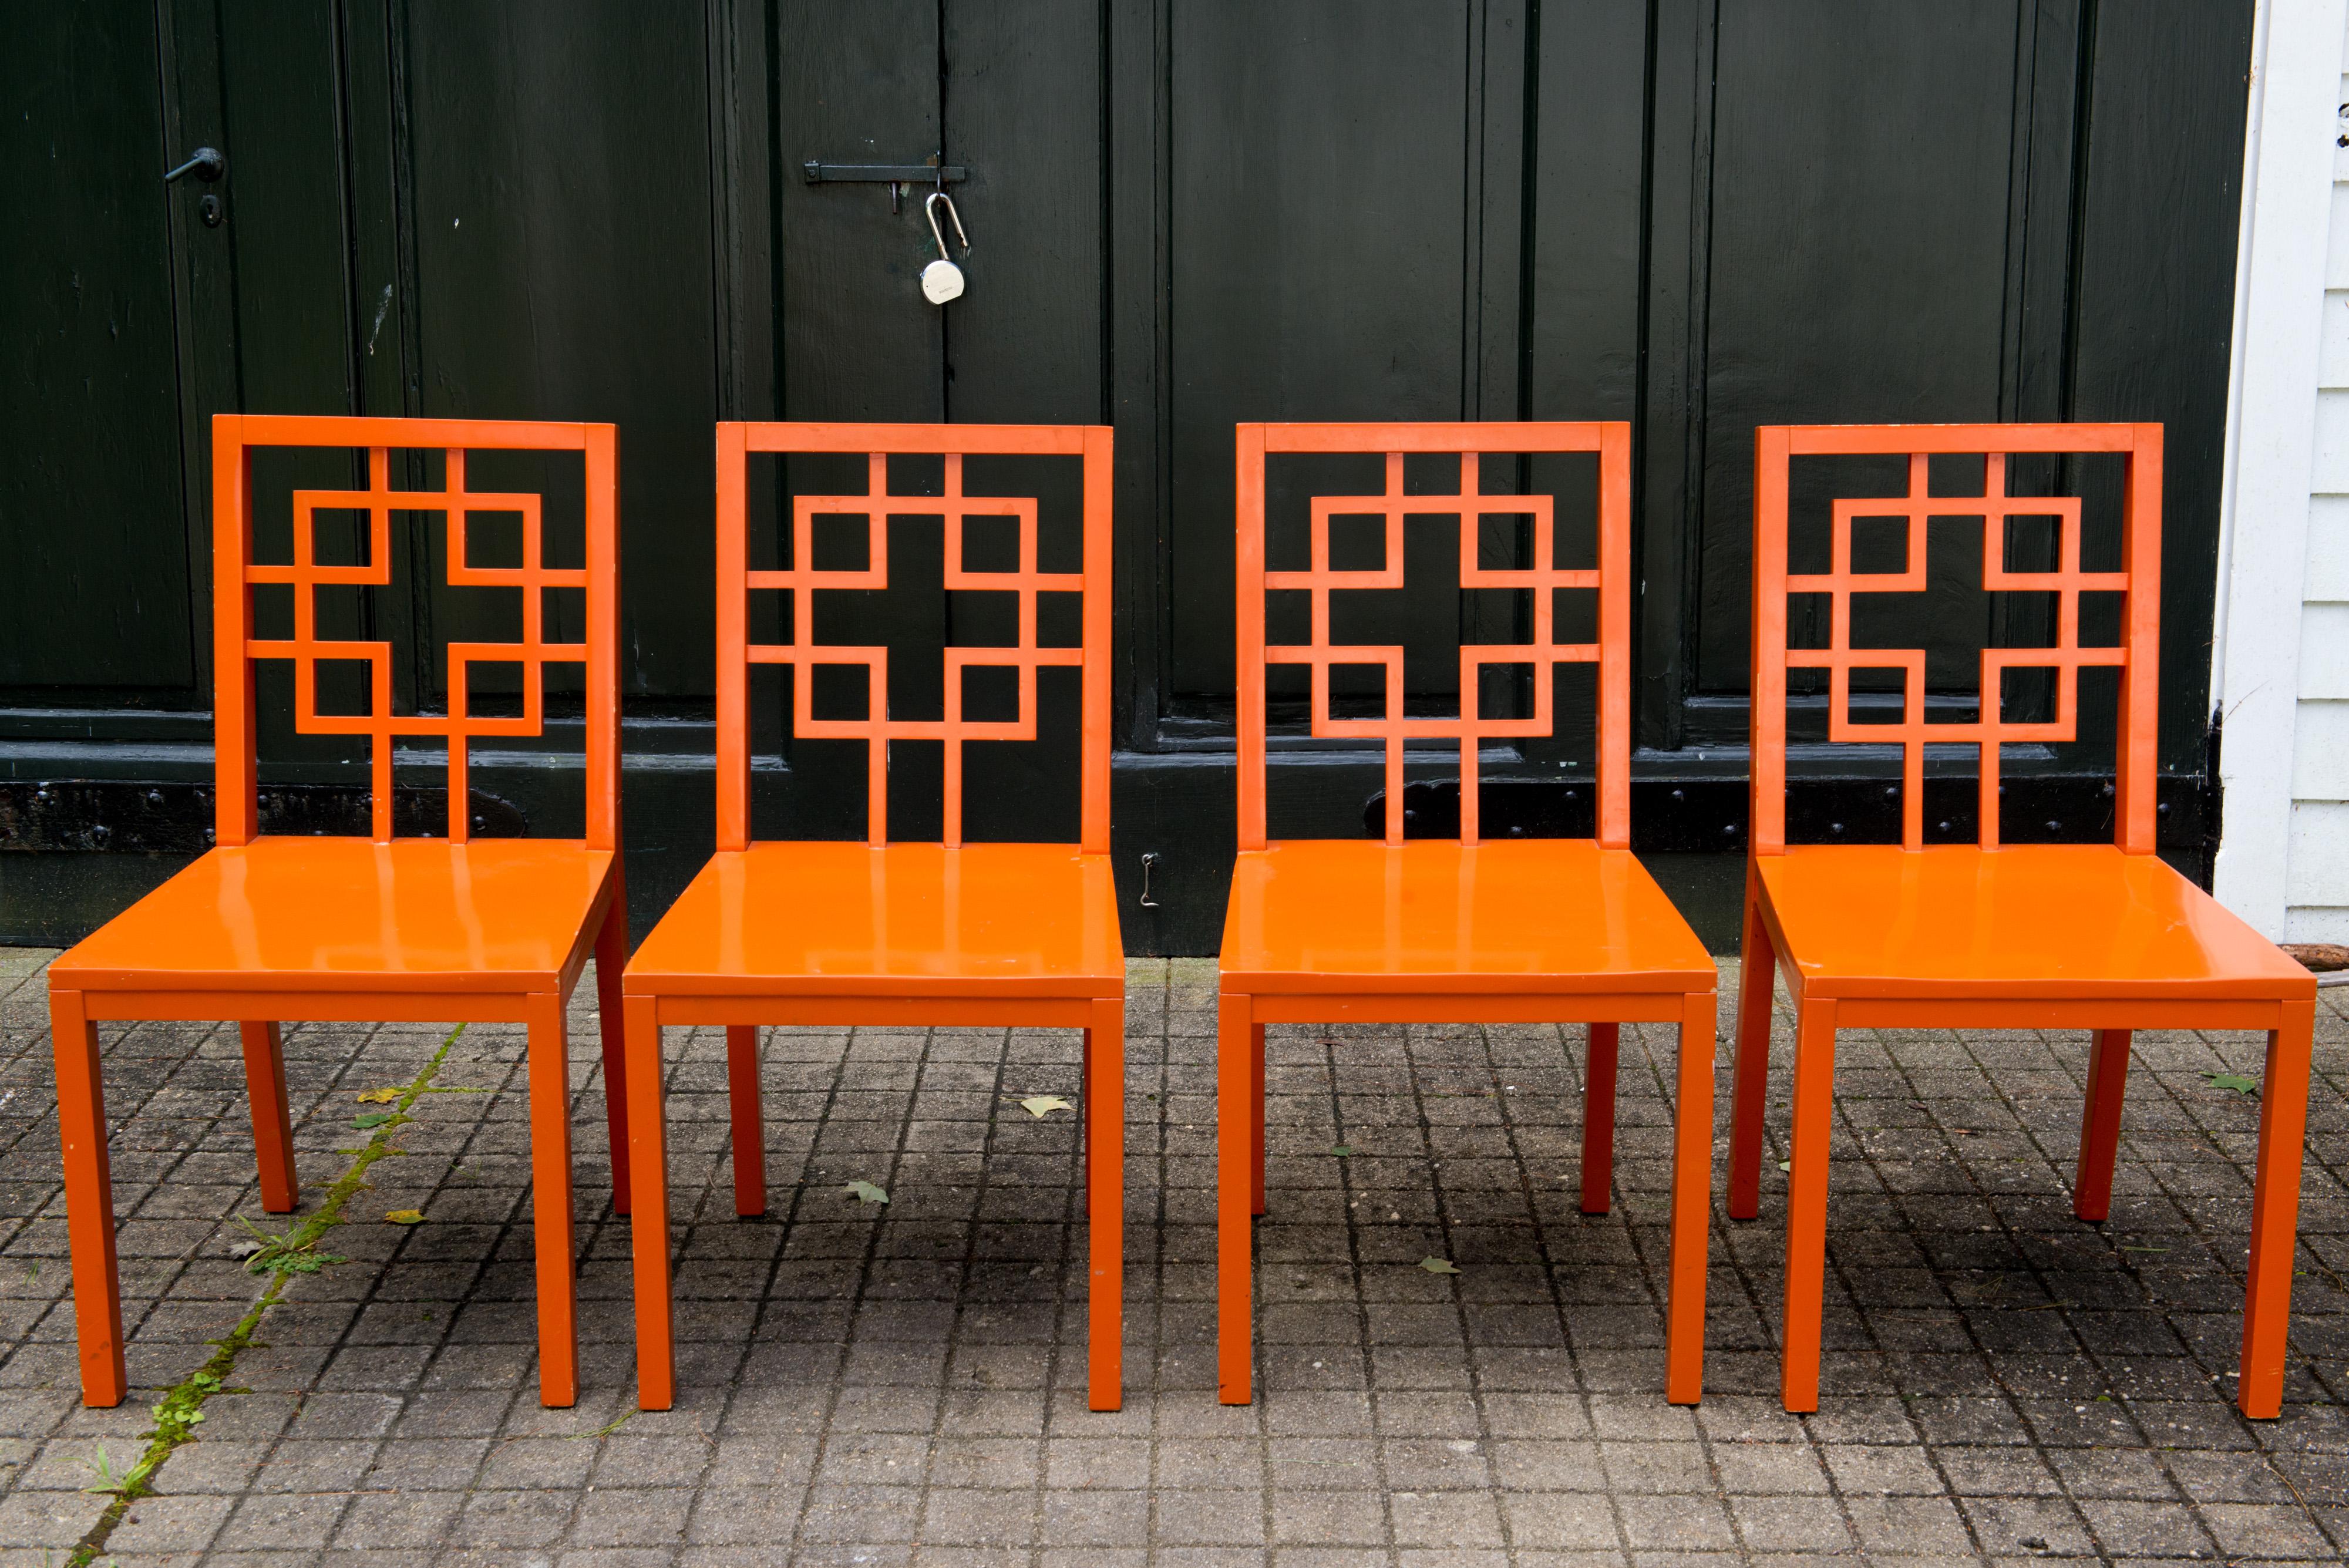 Set of 4 stylish fretwork chairs, orange lacquer over wood. Side chairs.